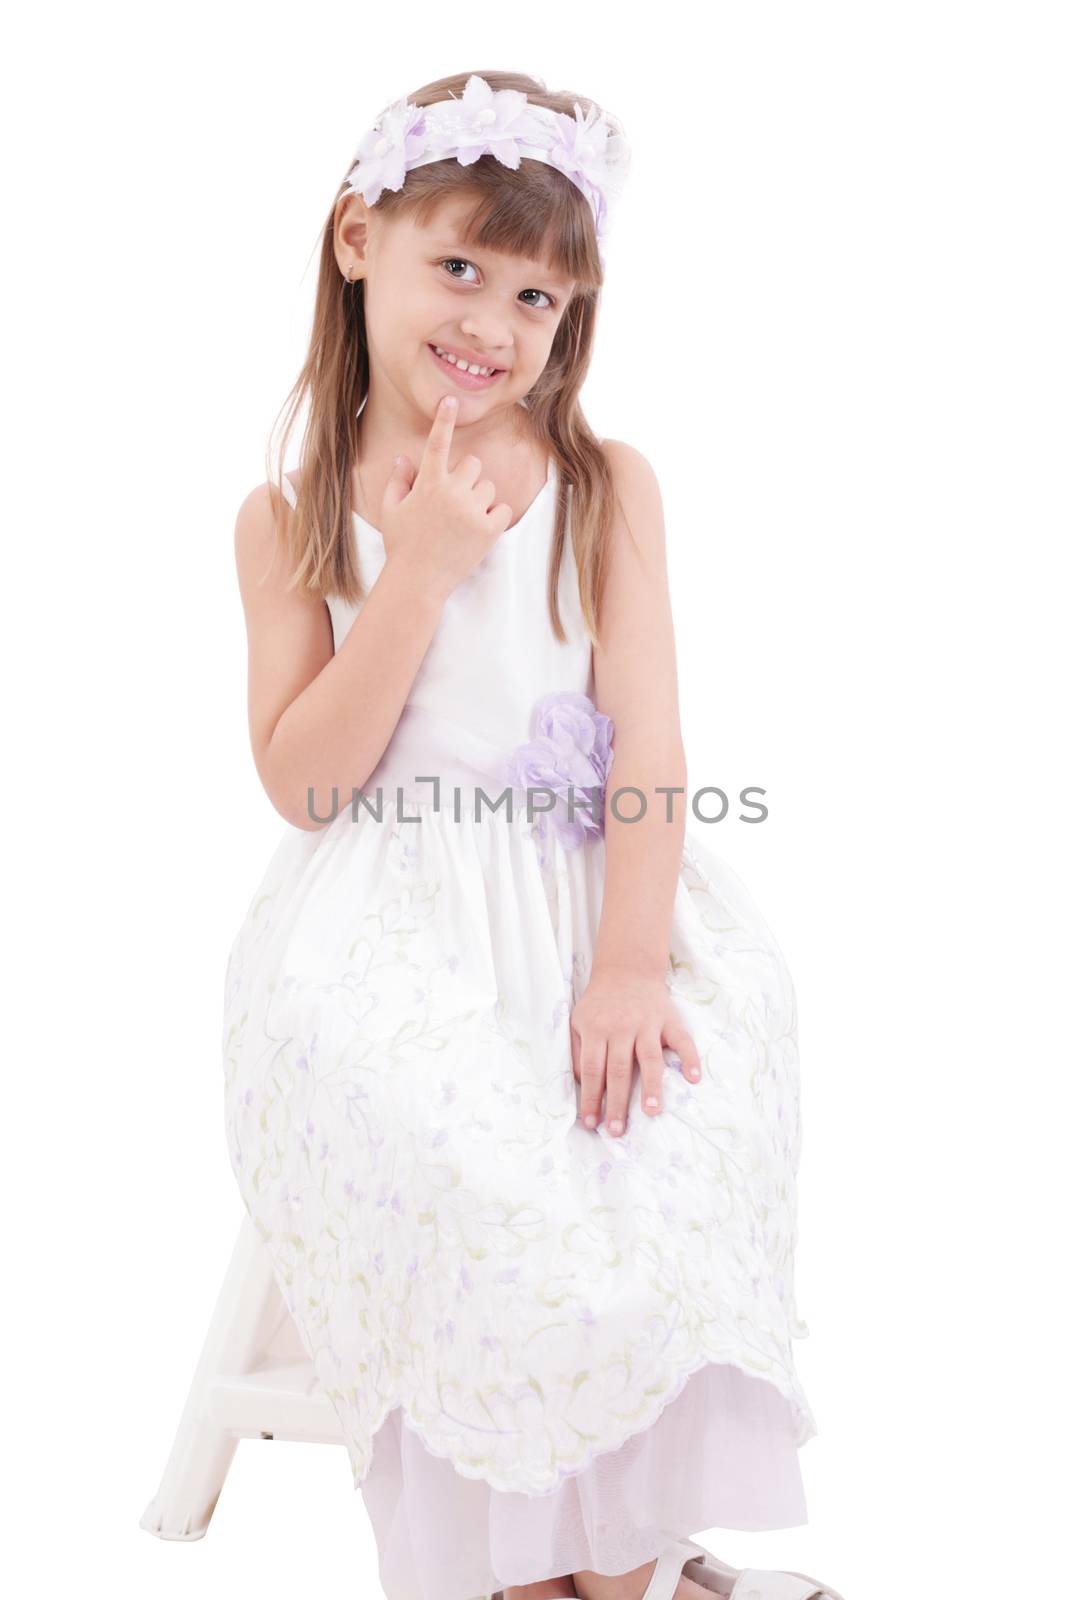 A portrait of a cheerful little girl on the white background